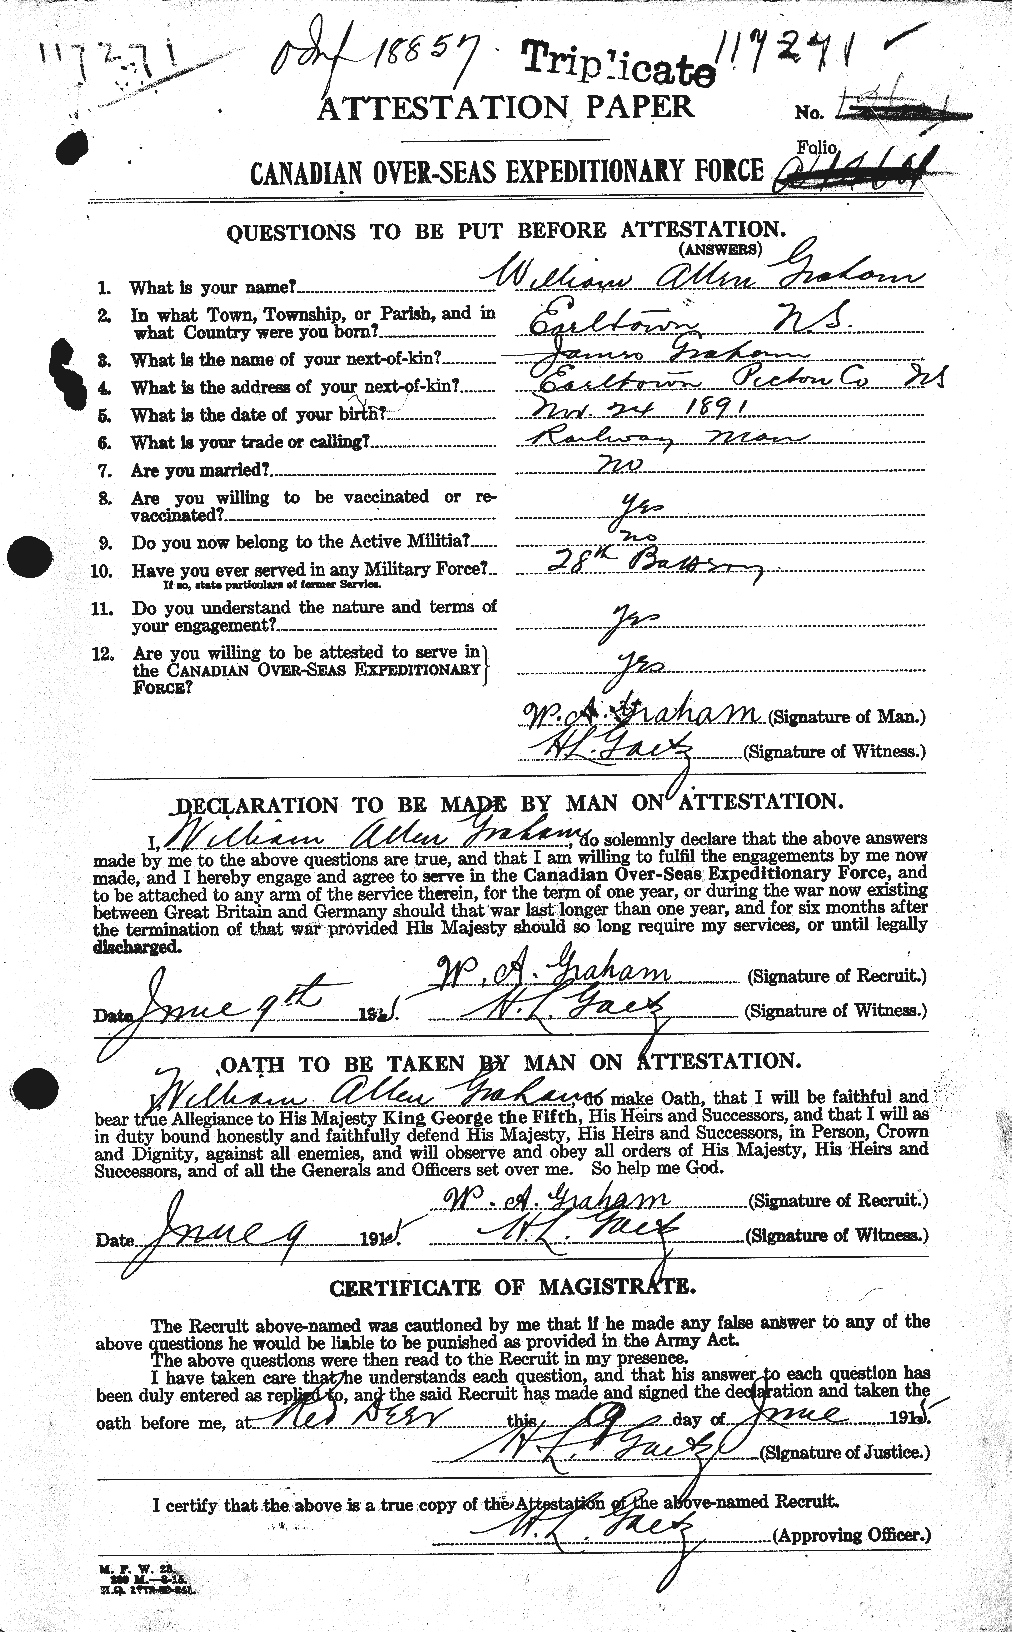 Personnel Records of the First World War - CEF 358021a